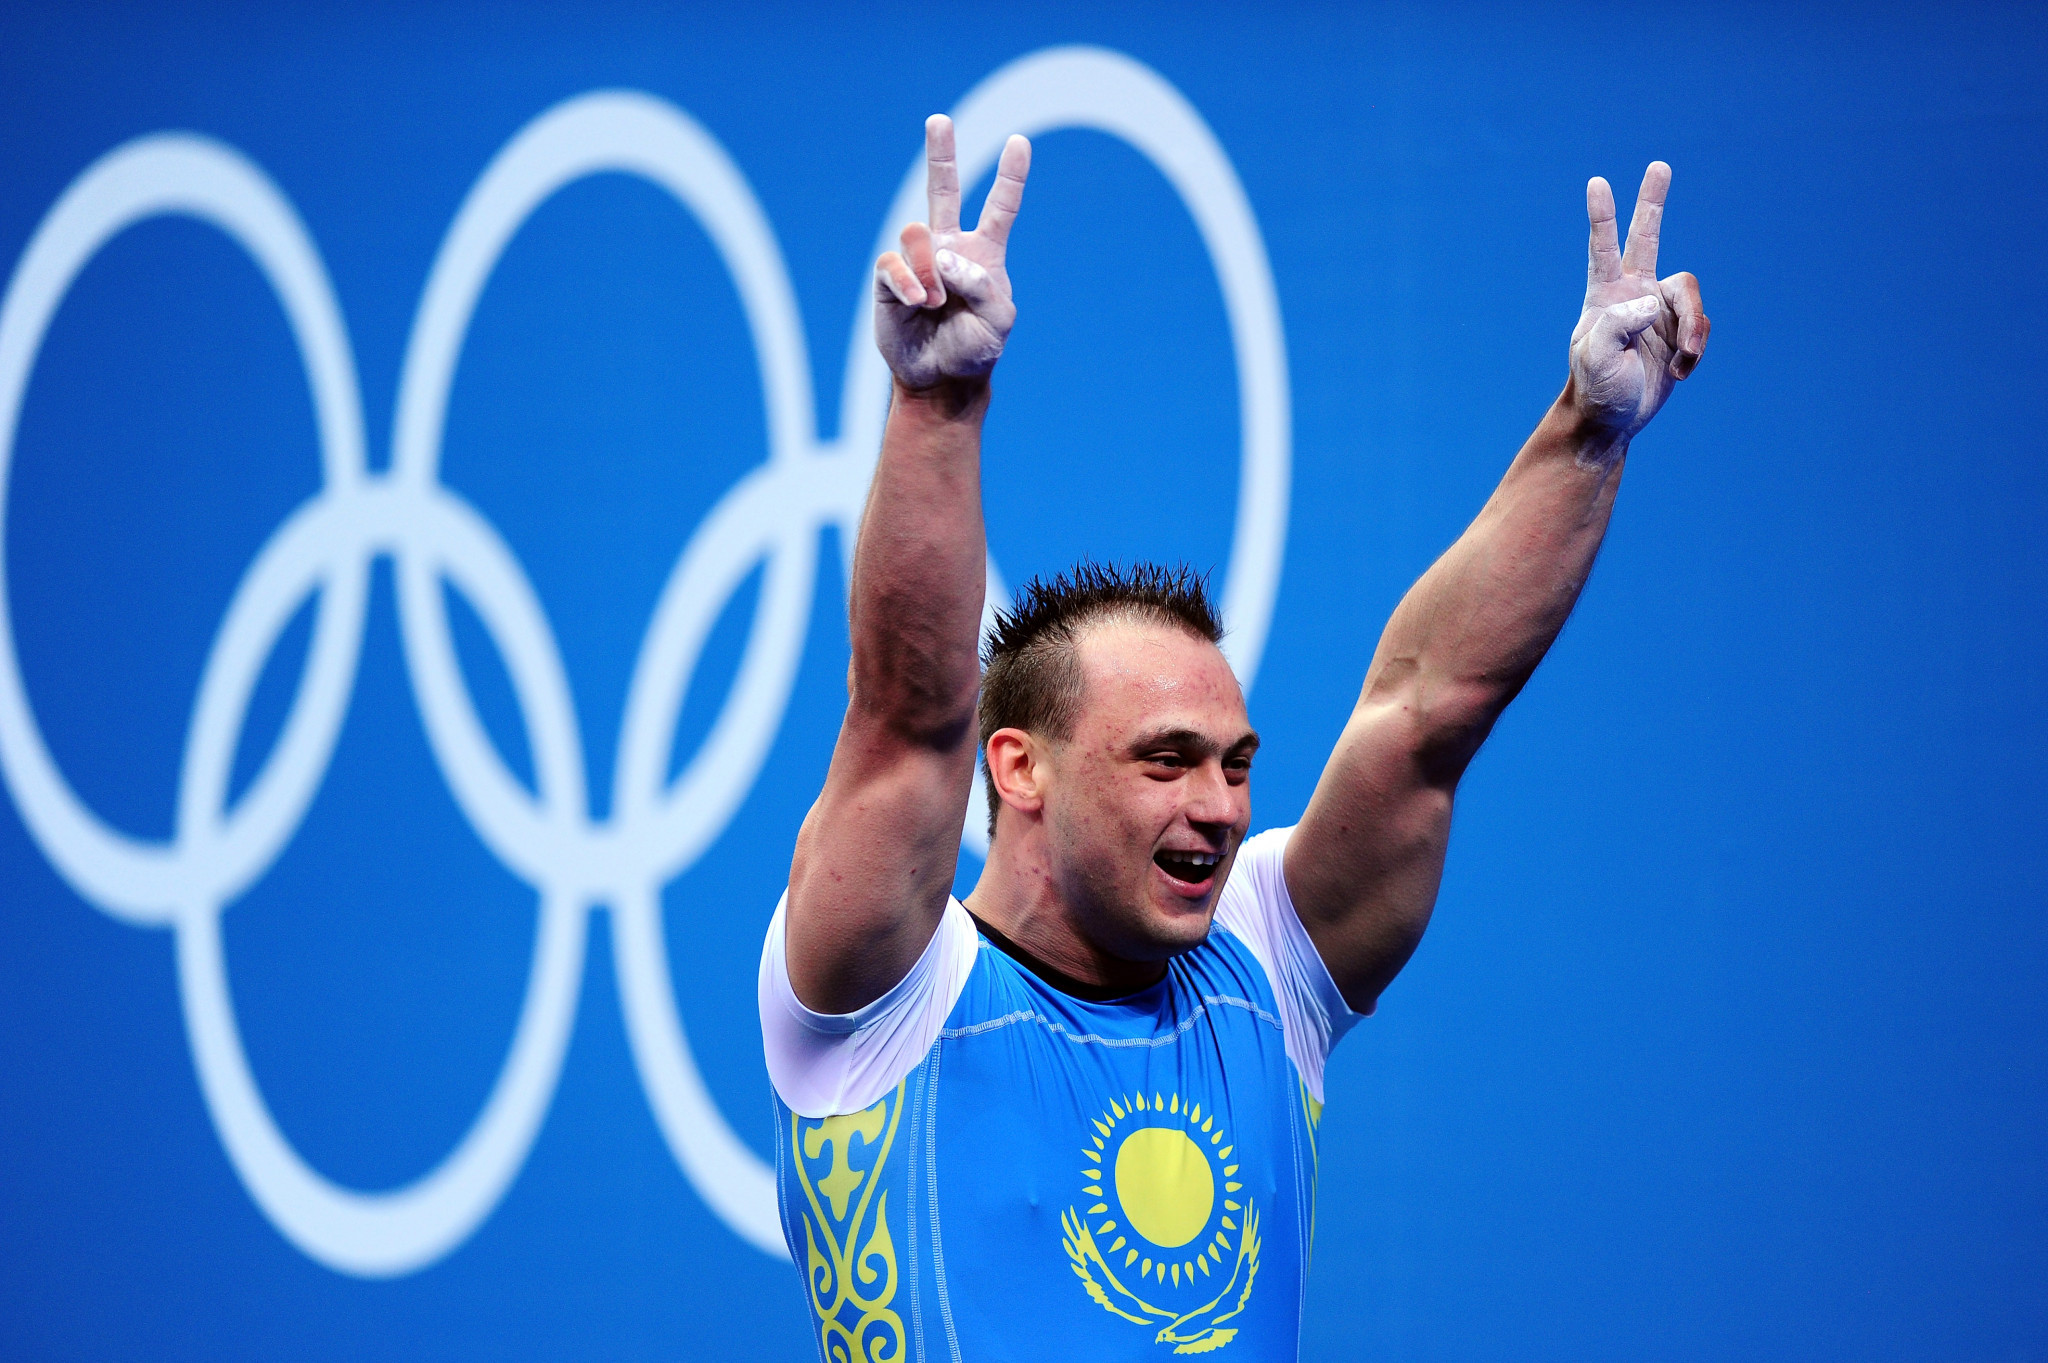 Ilya Ilyin, of Kazakhstan, celebrates after setting a new world record and winning gold medal in the Men's 94kg Weightlifting final on Day 8 of the London 2012 Olympic Games ©Getty Images